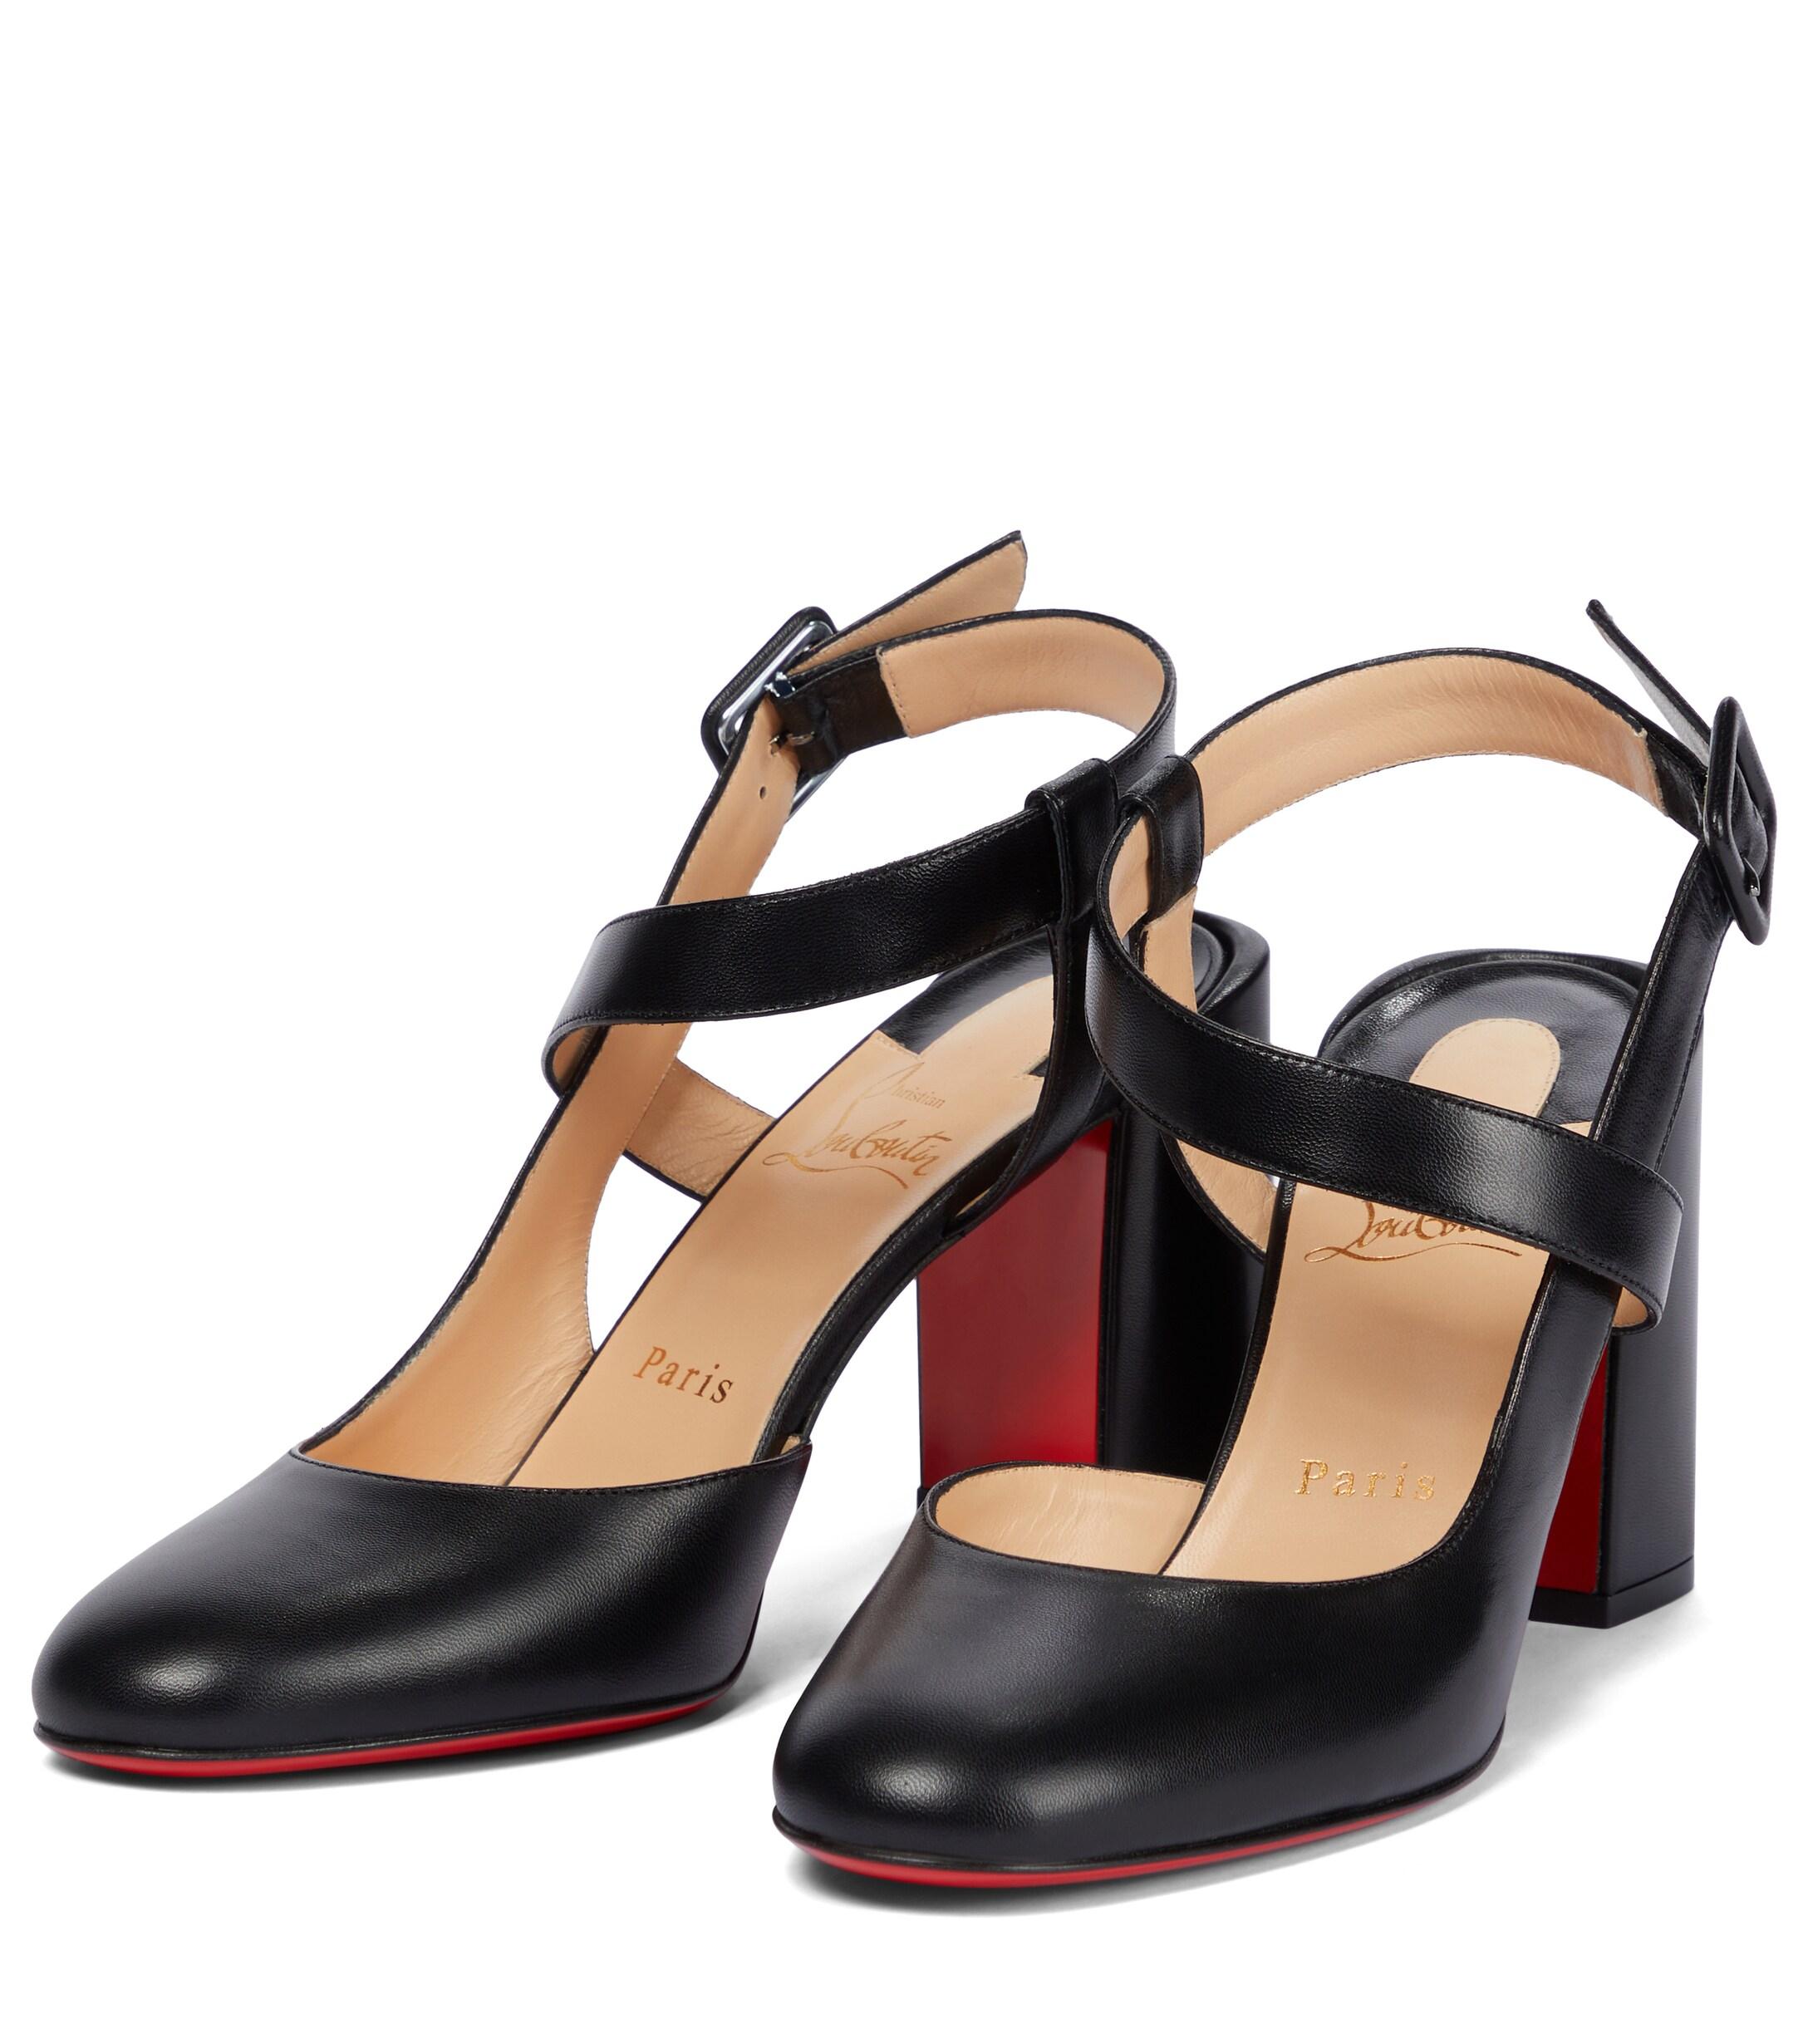 Christian Louboutin Alina 85 Leather Slingback Pumps in Black | Lyst